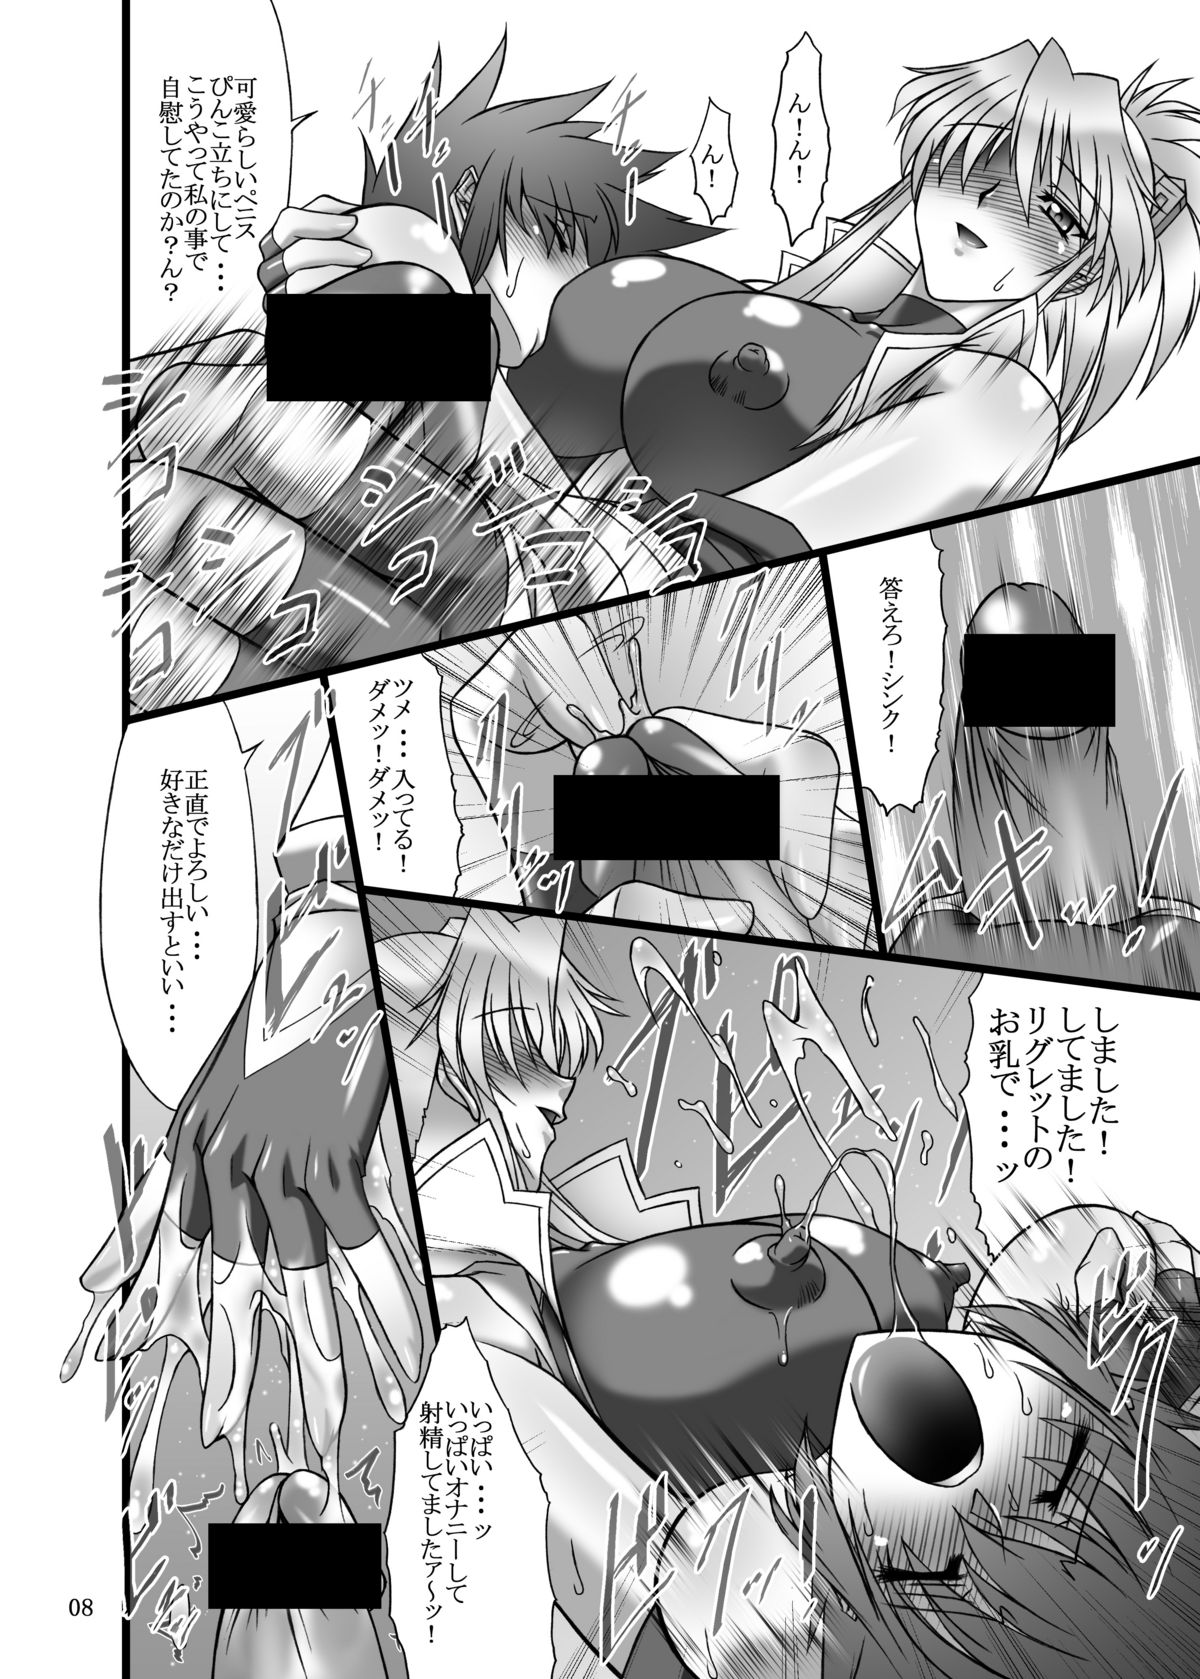 (C78) [Bobcaters (Hamon Ai, r13)] Kyoudou (Tales of the Abyss) page 8 full